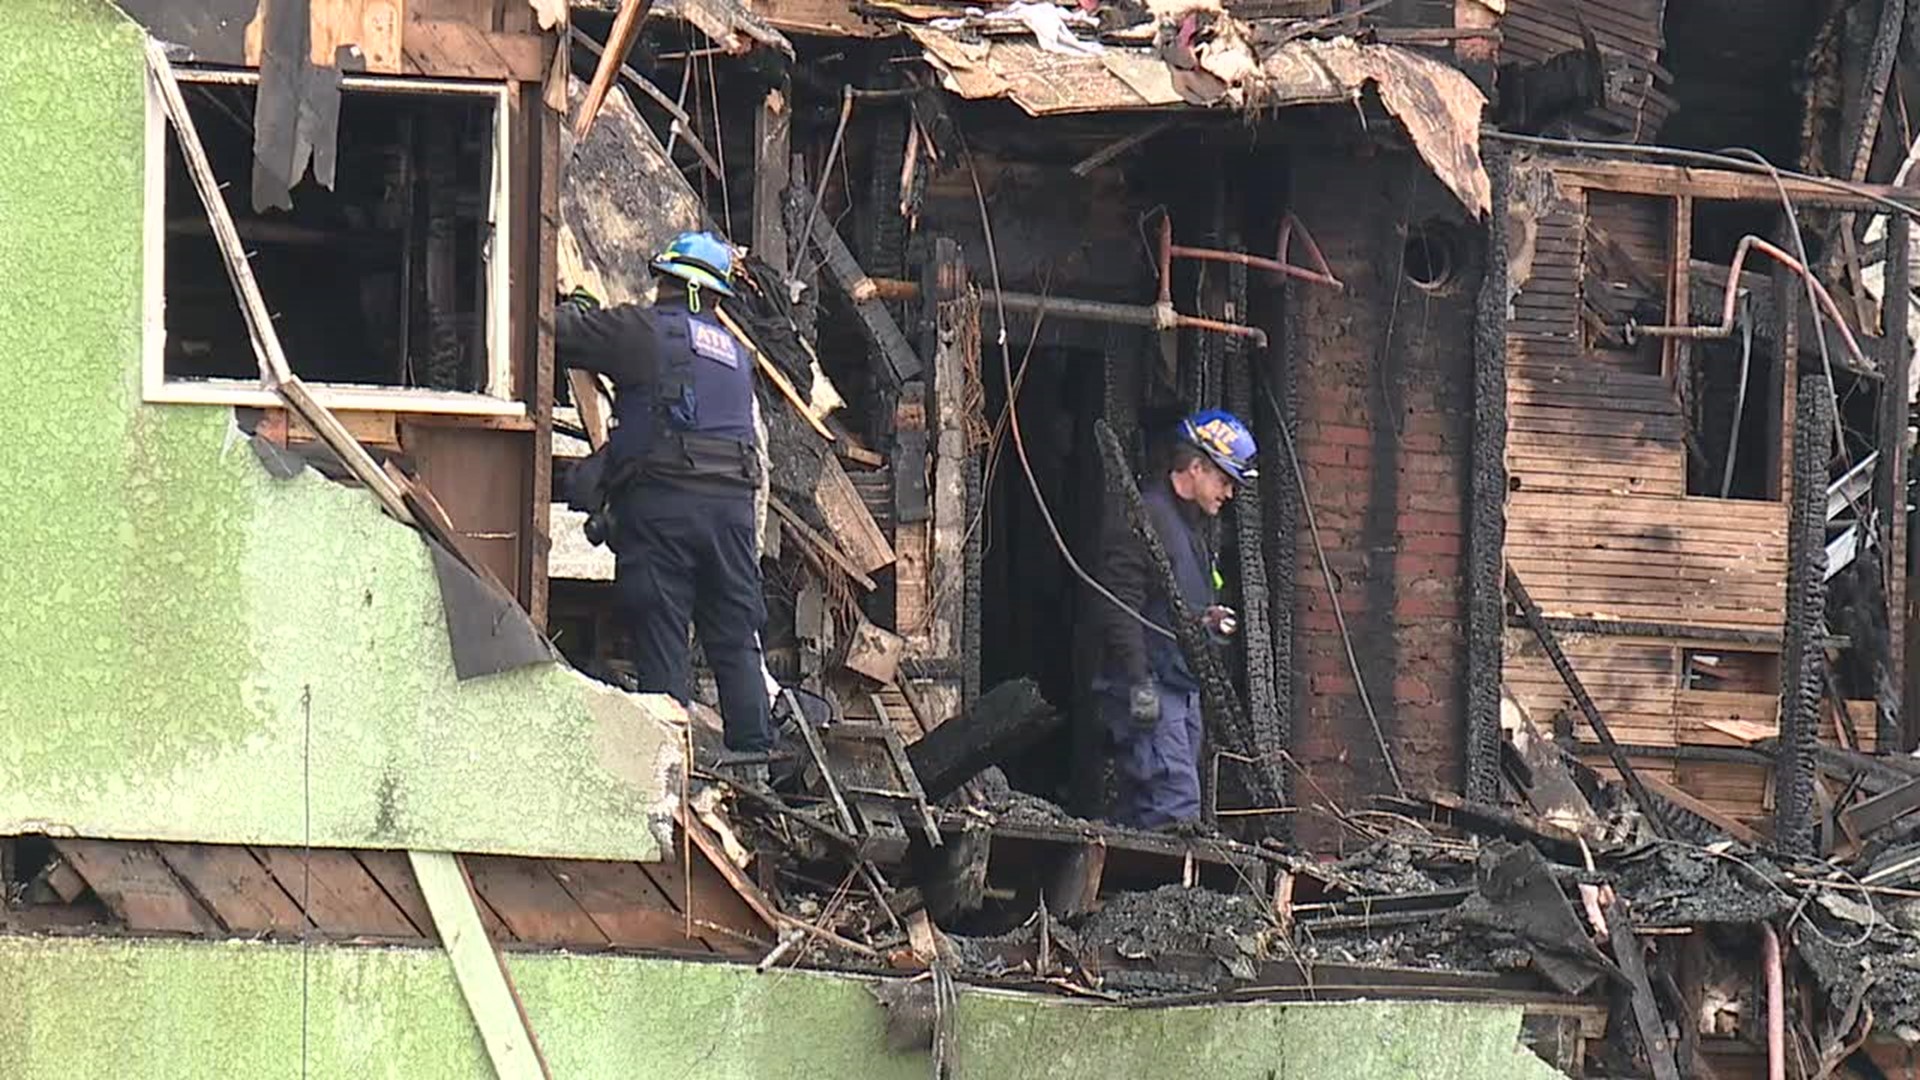 Officials from several agencies continue to investigate the deadly fire.